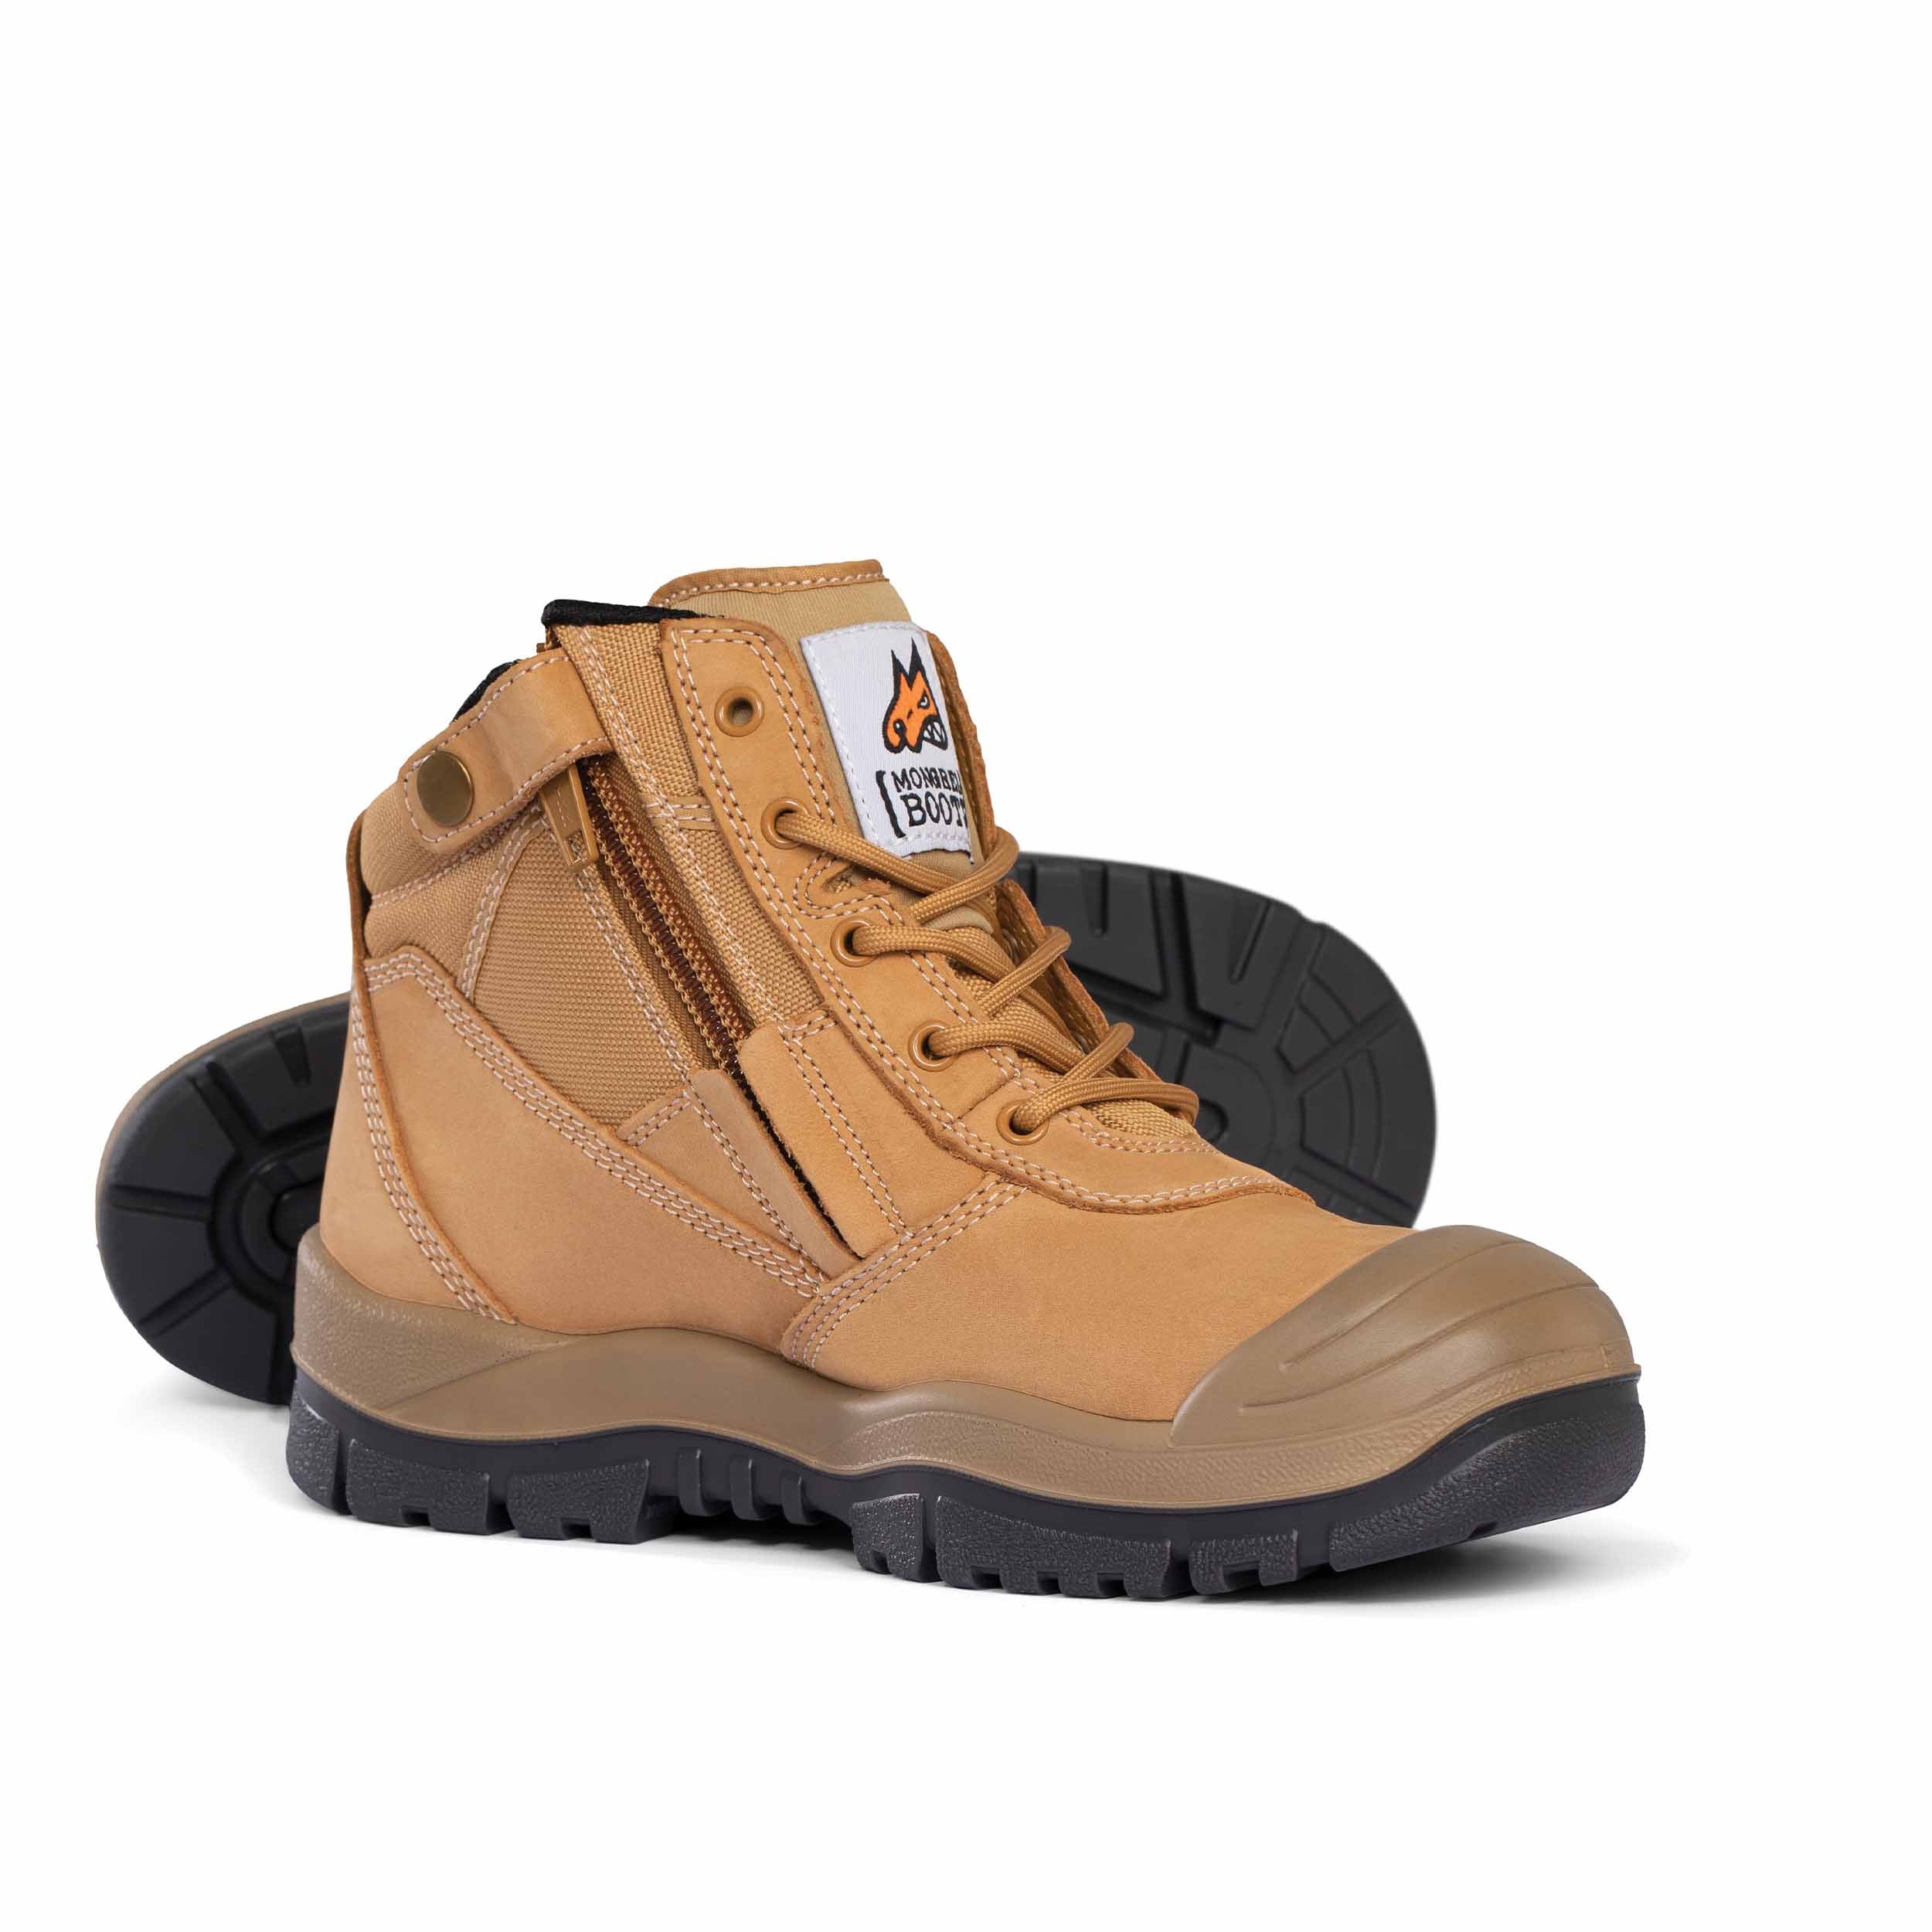 Mongrel Zipsider Wheat Ankle Boot with Scuff Cap